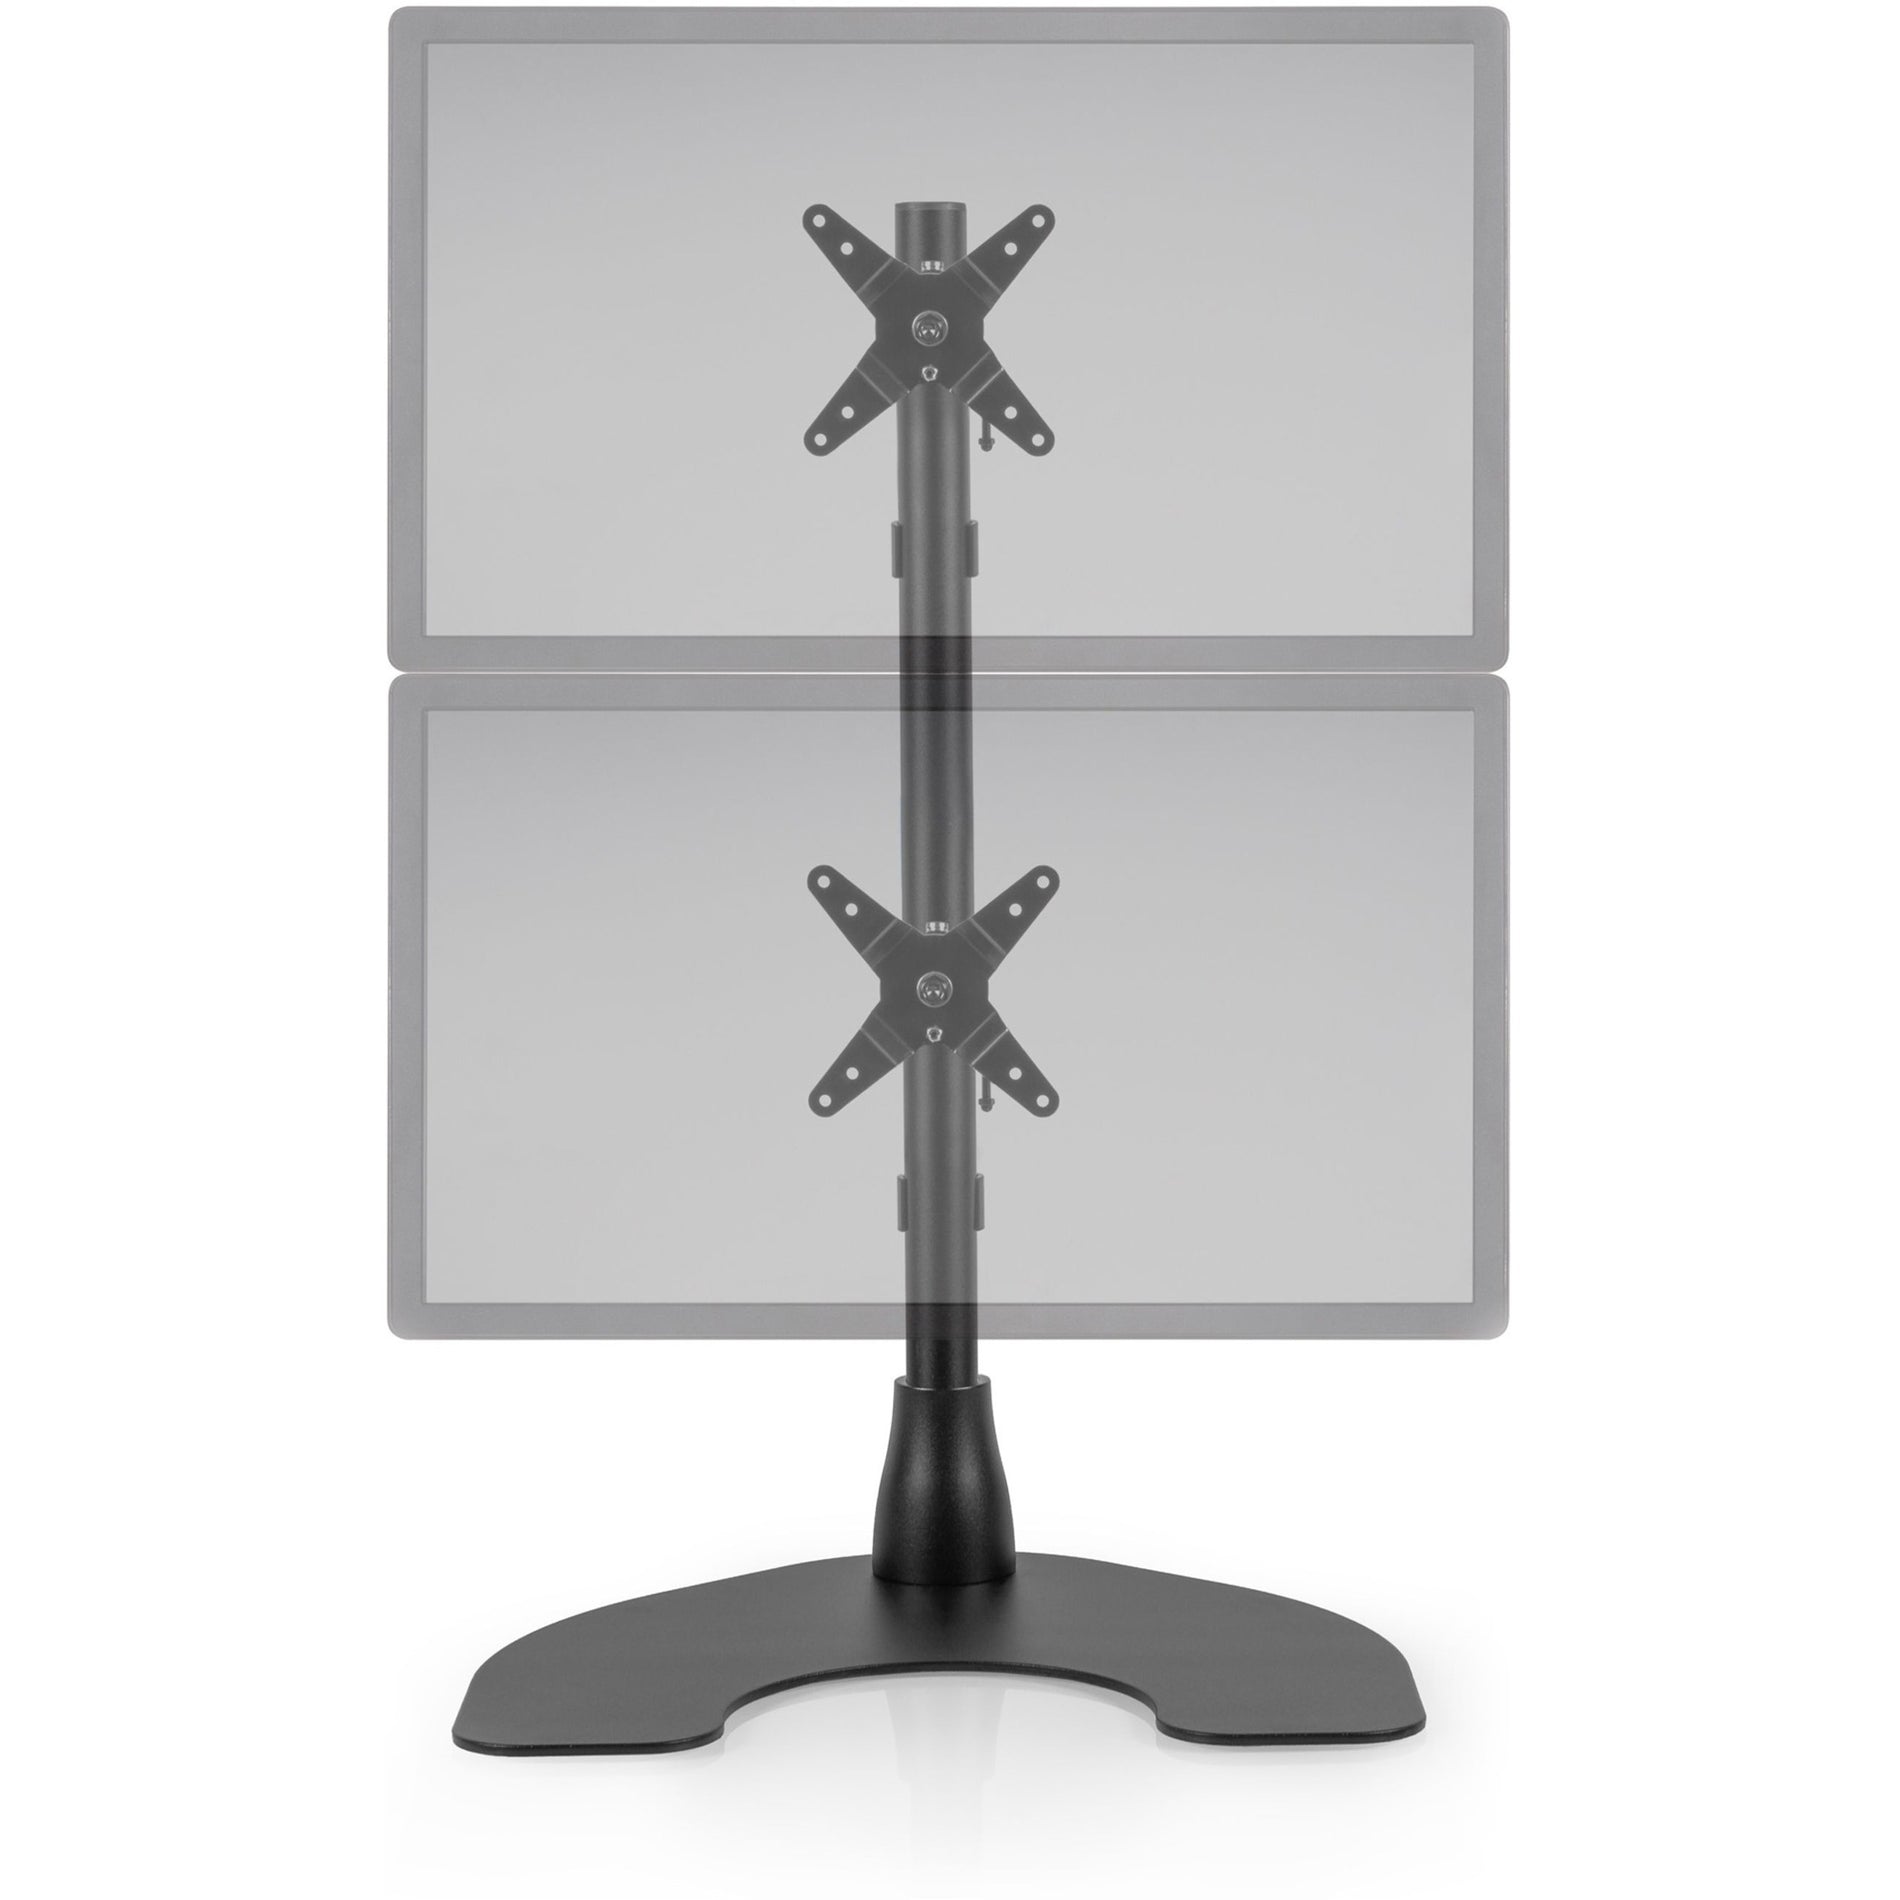 Ergotech 100-D28-B11 Vertical Dual Monitor Desk Stand, Mount 2 Monitors with Ease